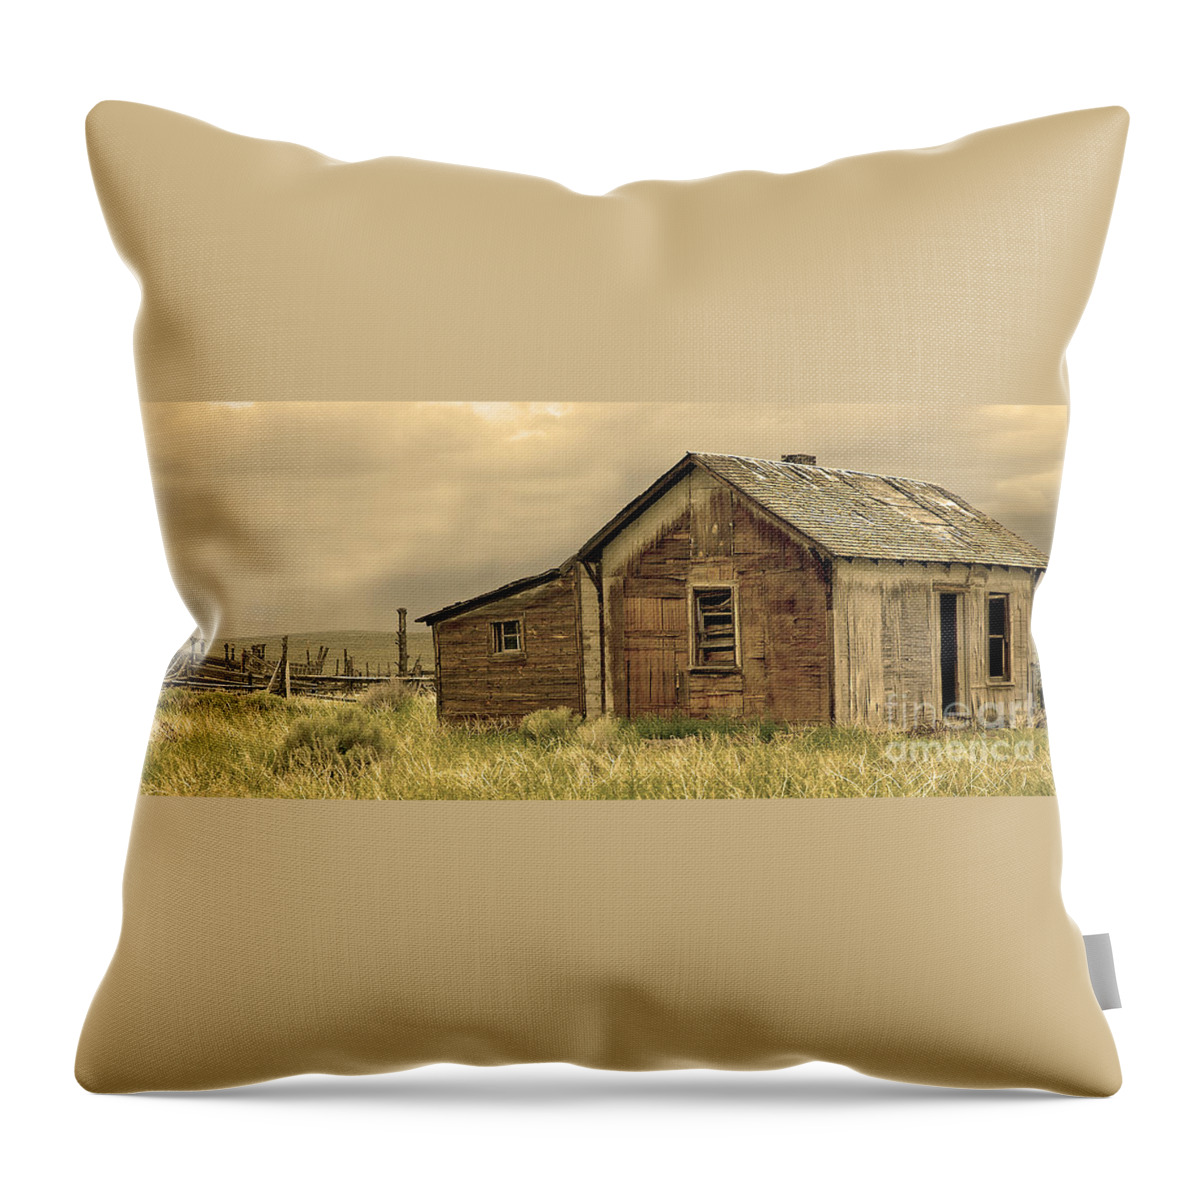 Central Throw Pillow featuring the photograph Abandoned by Nick Boren